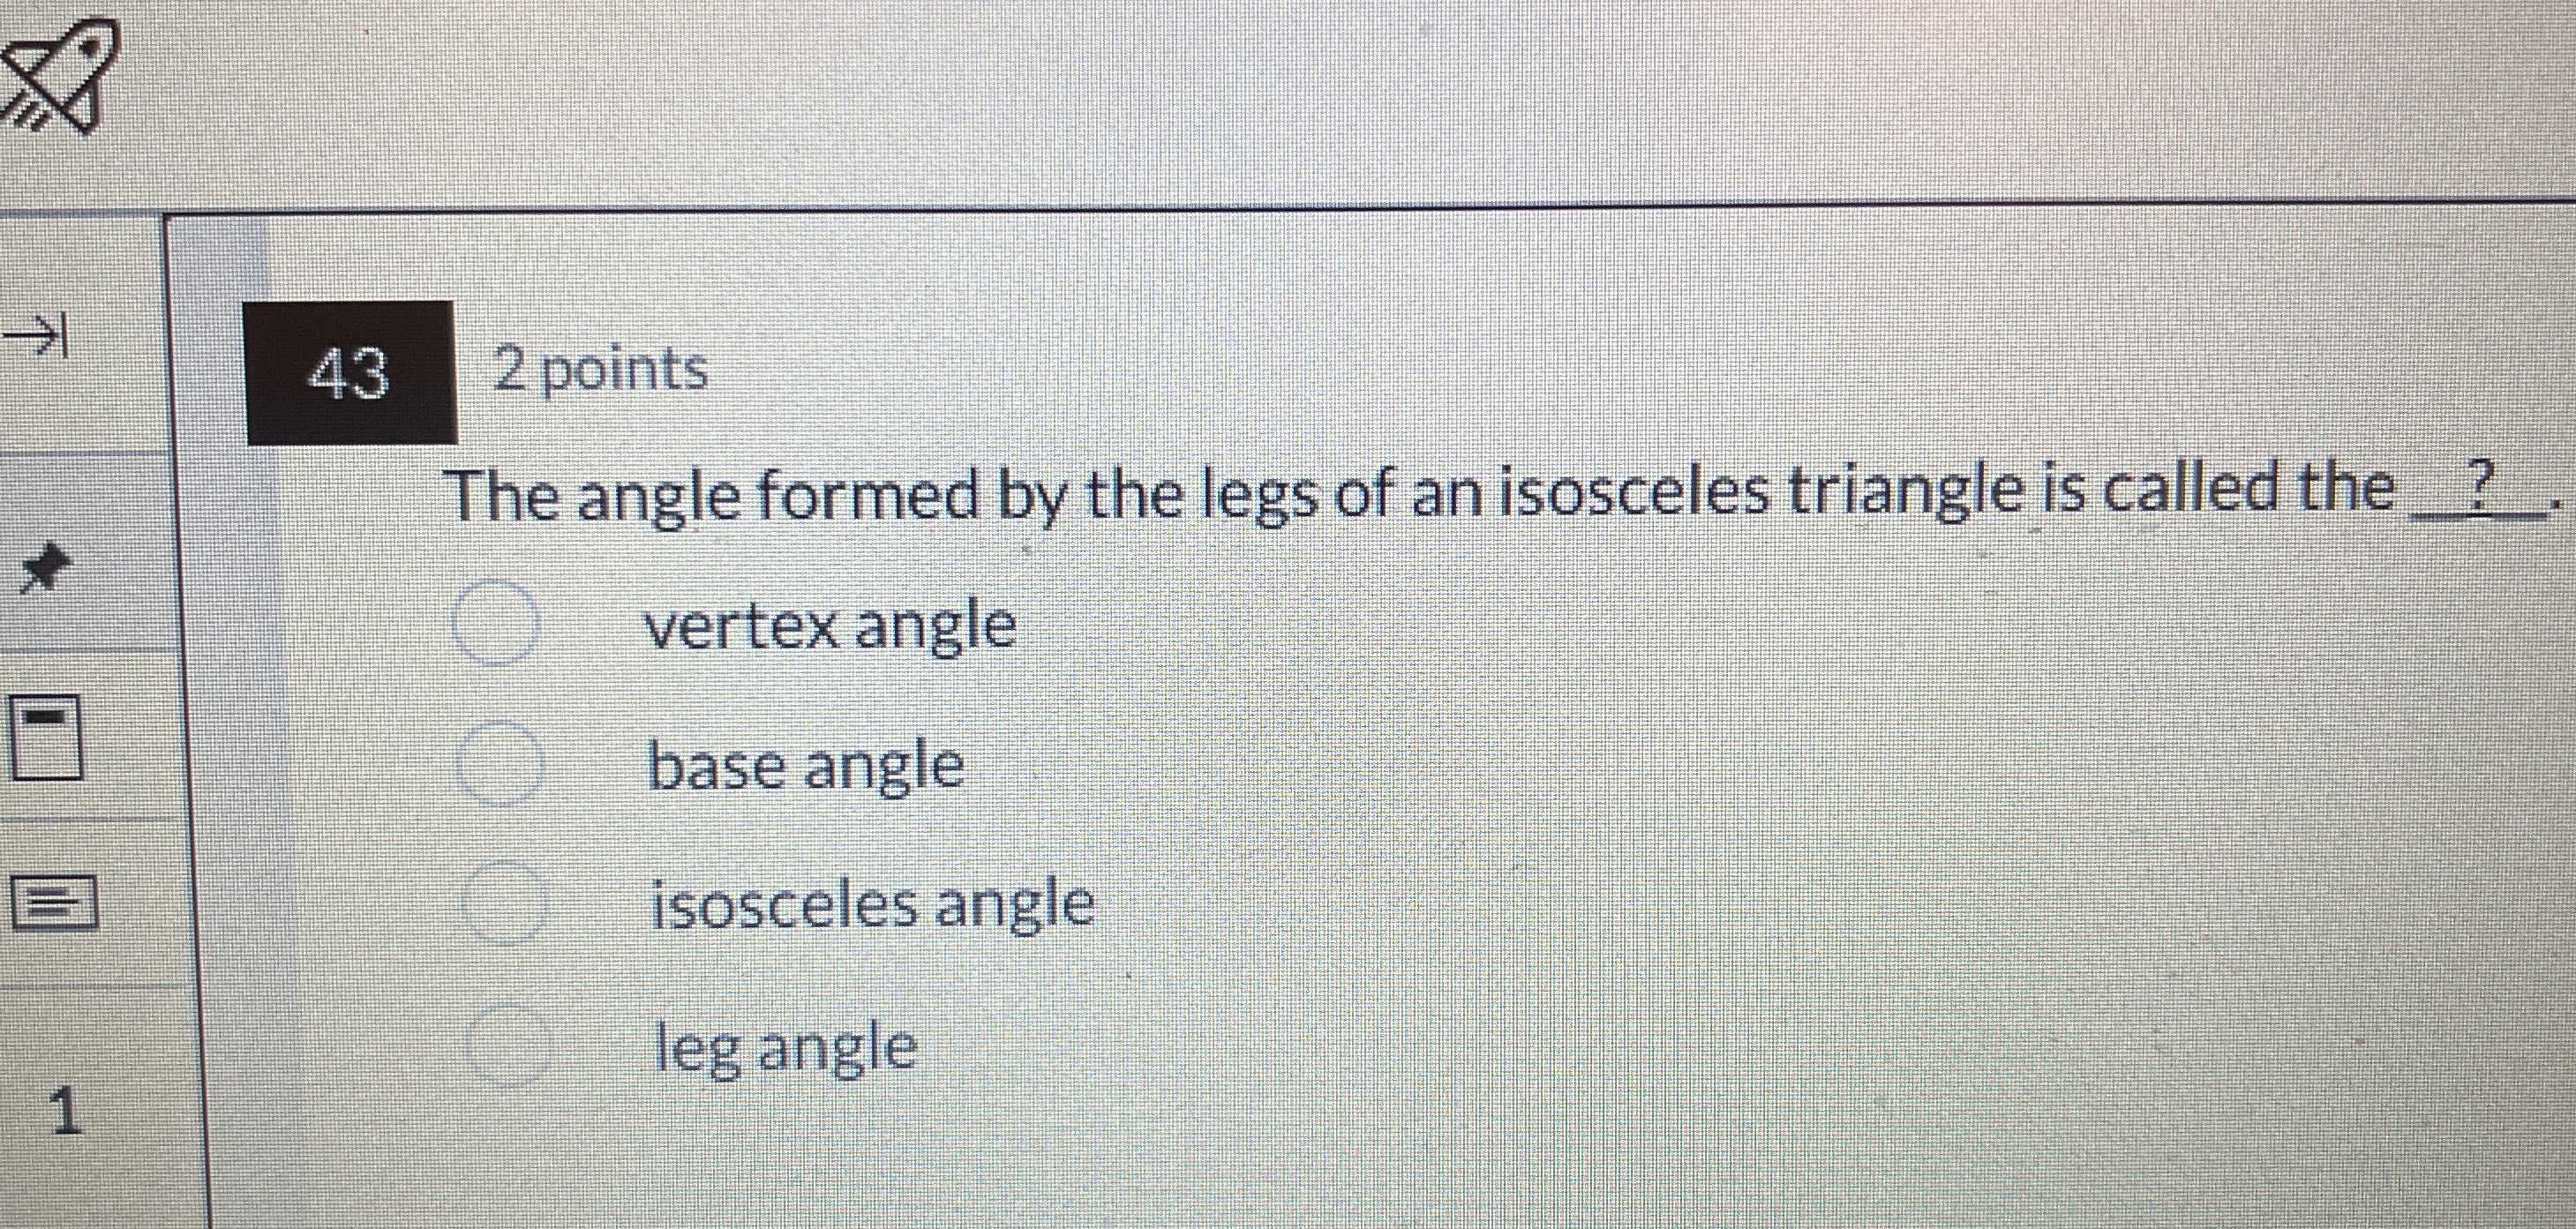 The angle formed by the legs of an isosceles trian...